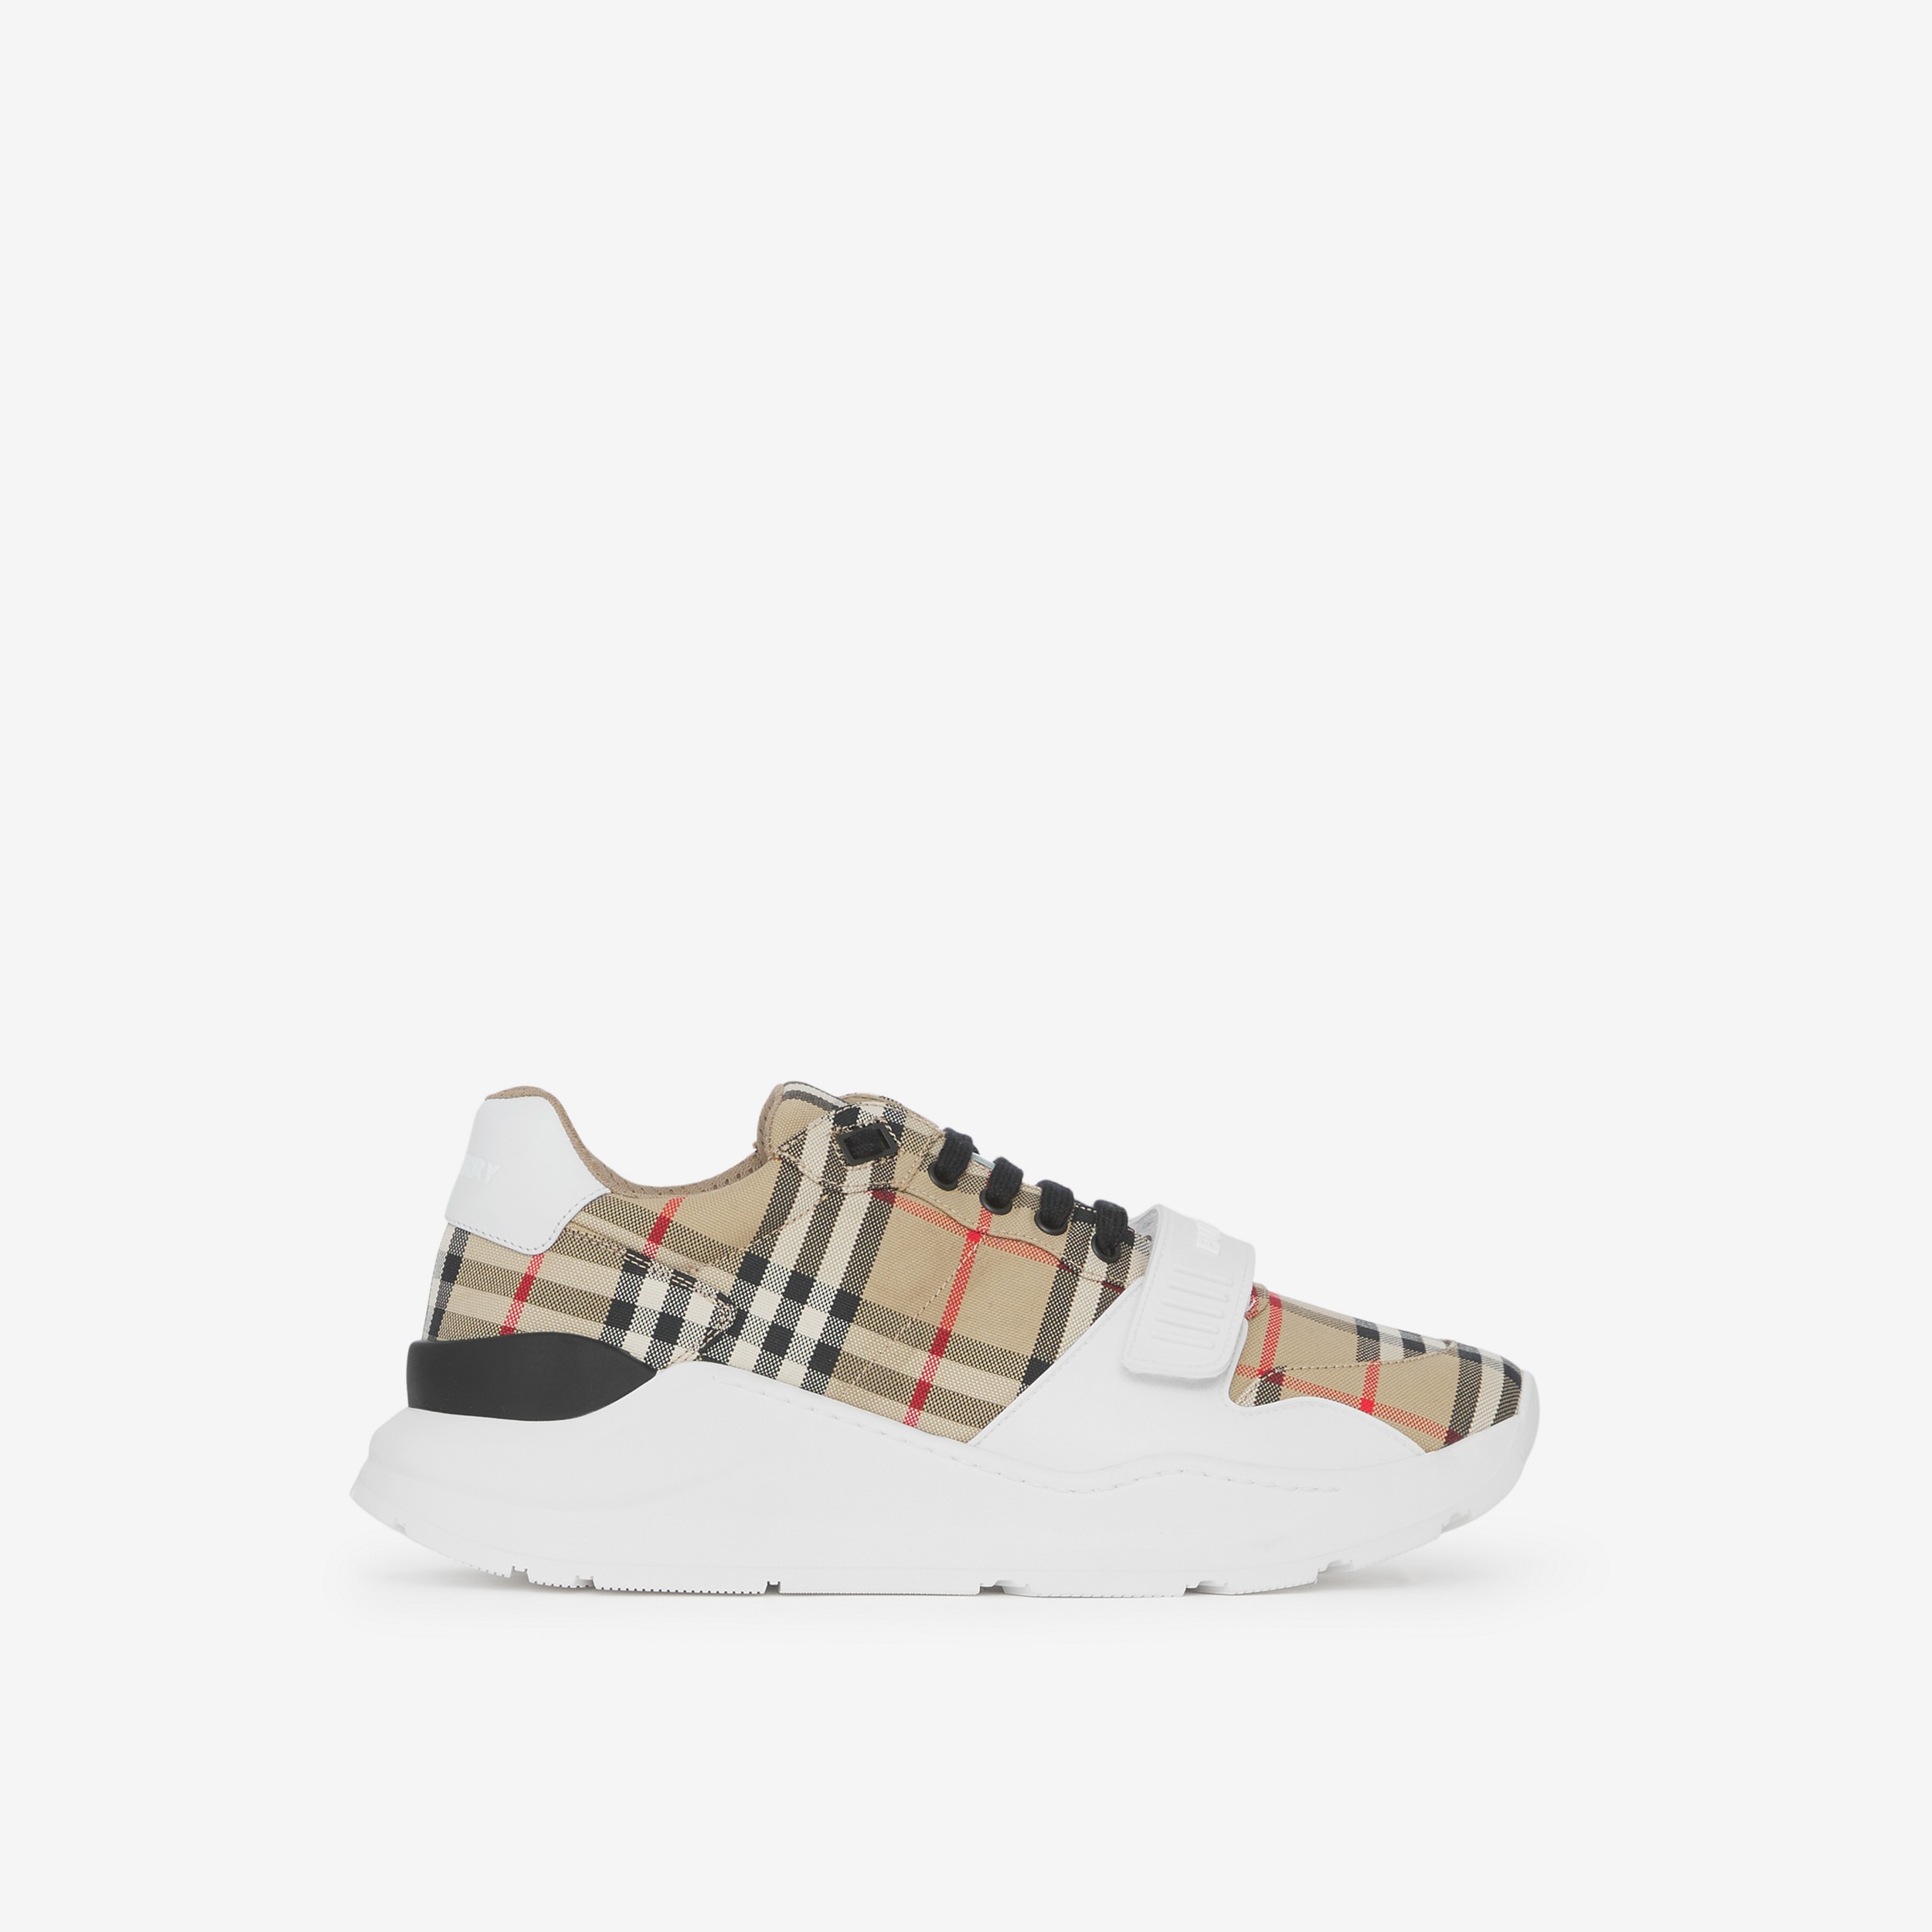 Vintage Check, Suede and Leather Sneakers in Archive Beige 